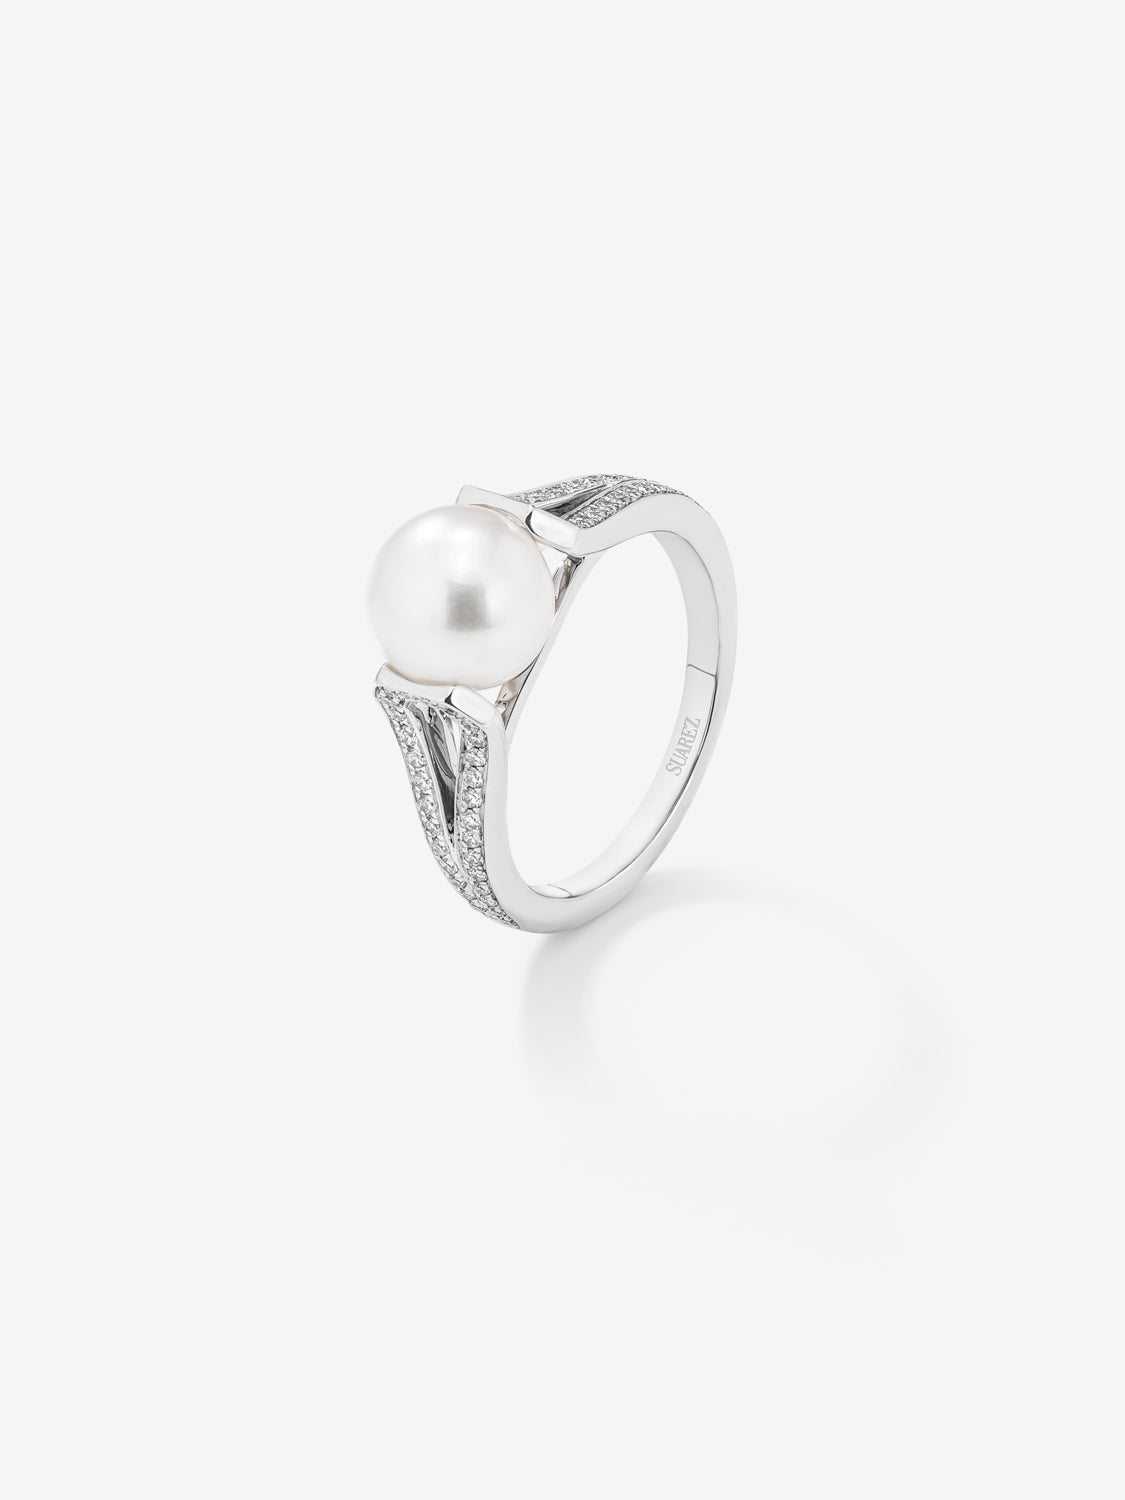 18K white gold ring with 8mm akoya pearl and 60 brilliant-cut diamonds with a total of 0.23 cts